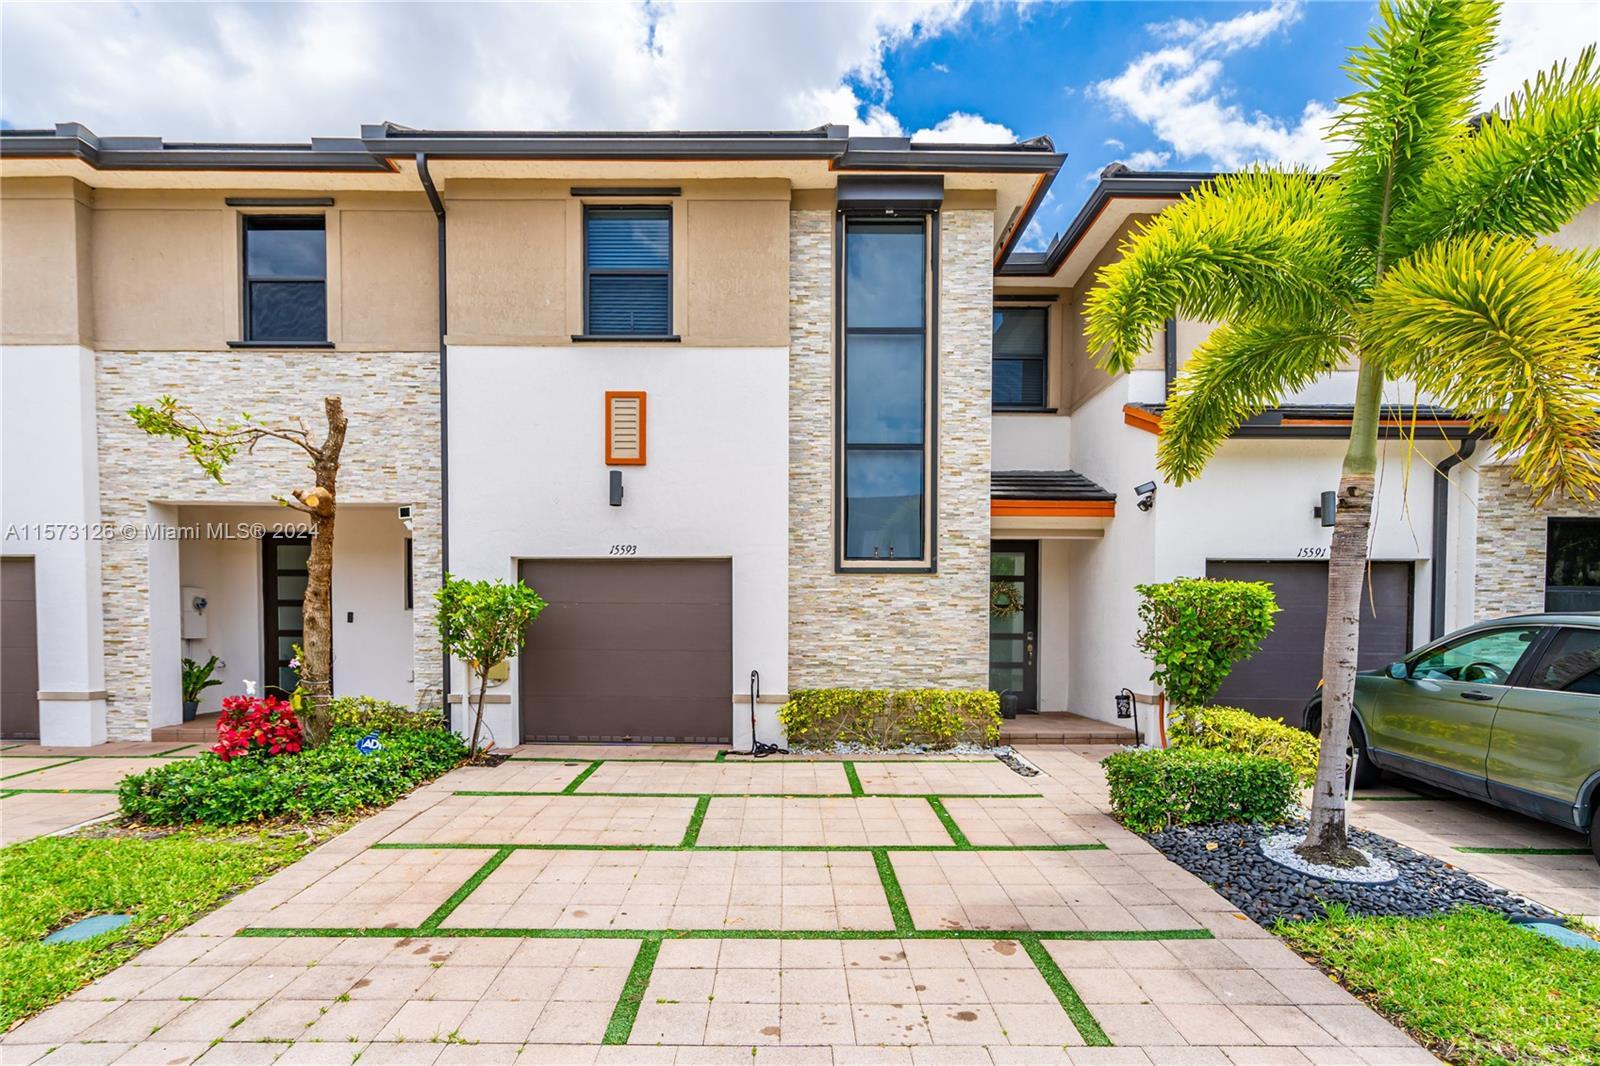 Come live in Miami Lakes exclusive SATORI community!. Townhome with 3 beds 2.5 baths. Spacious gourm